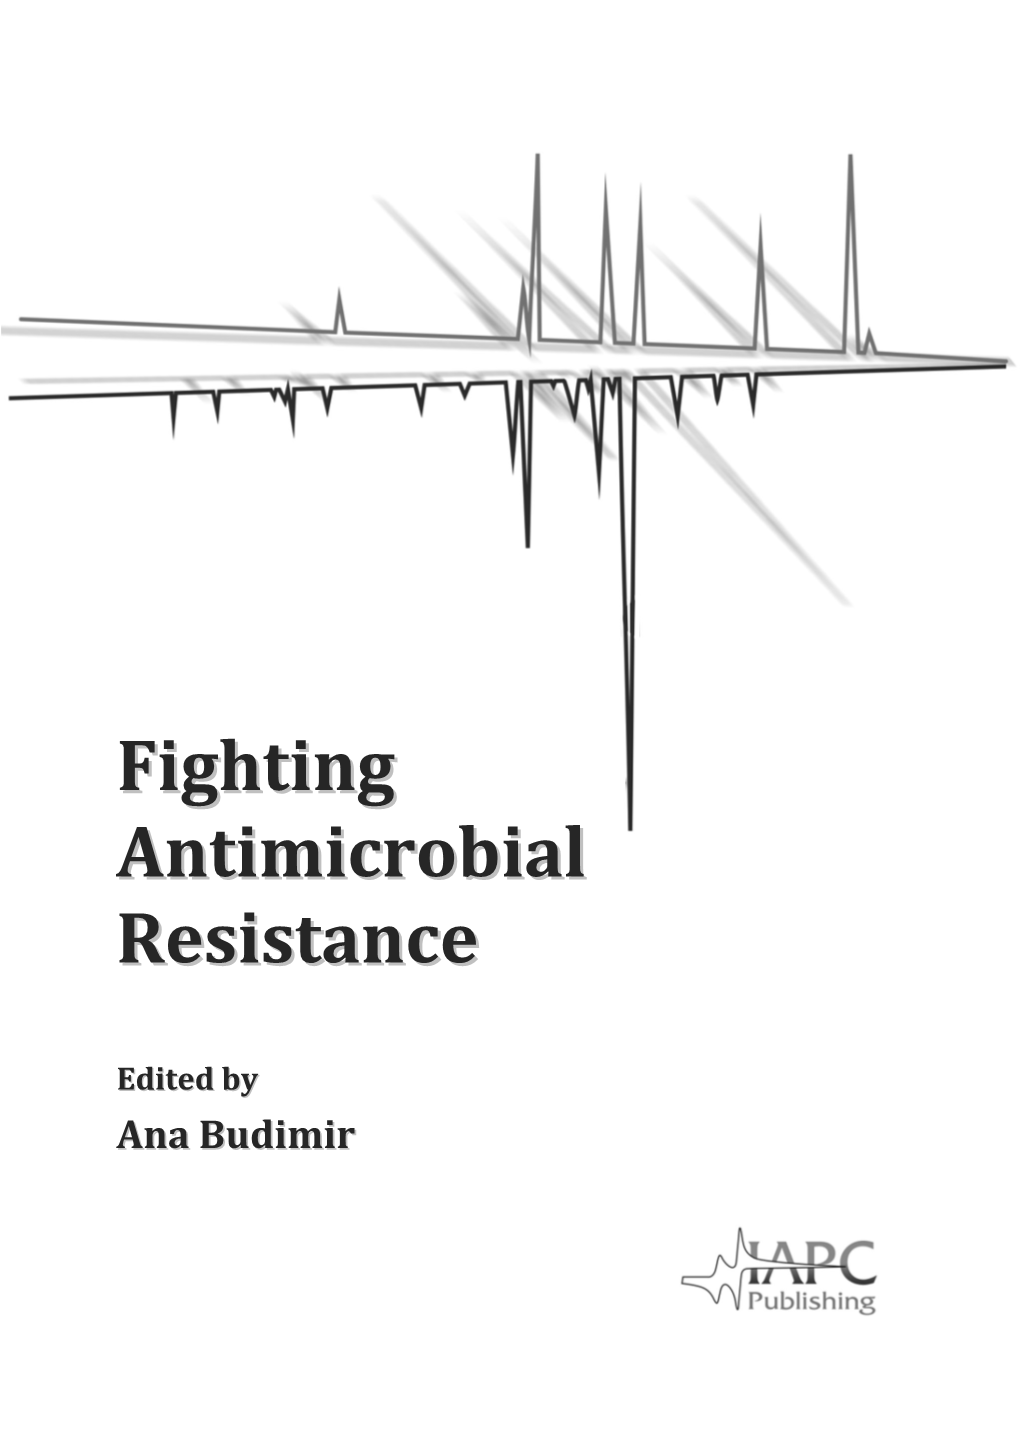 Fighting Antimicrobial Resistance